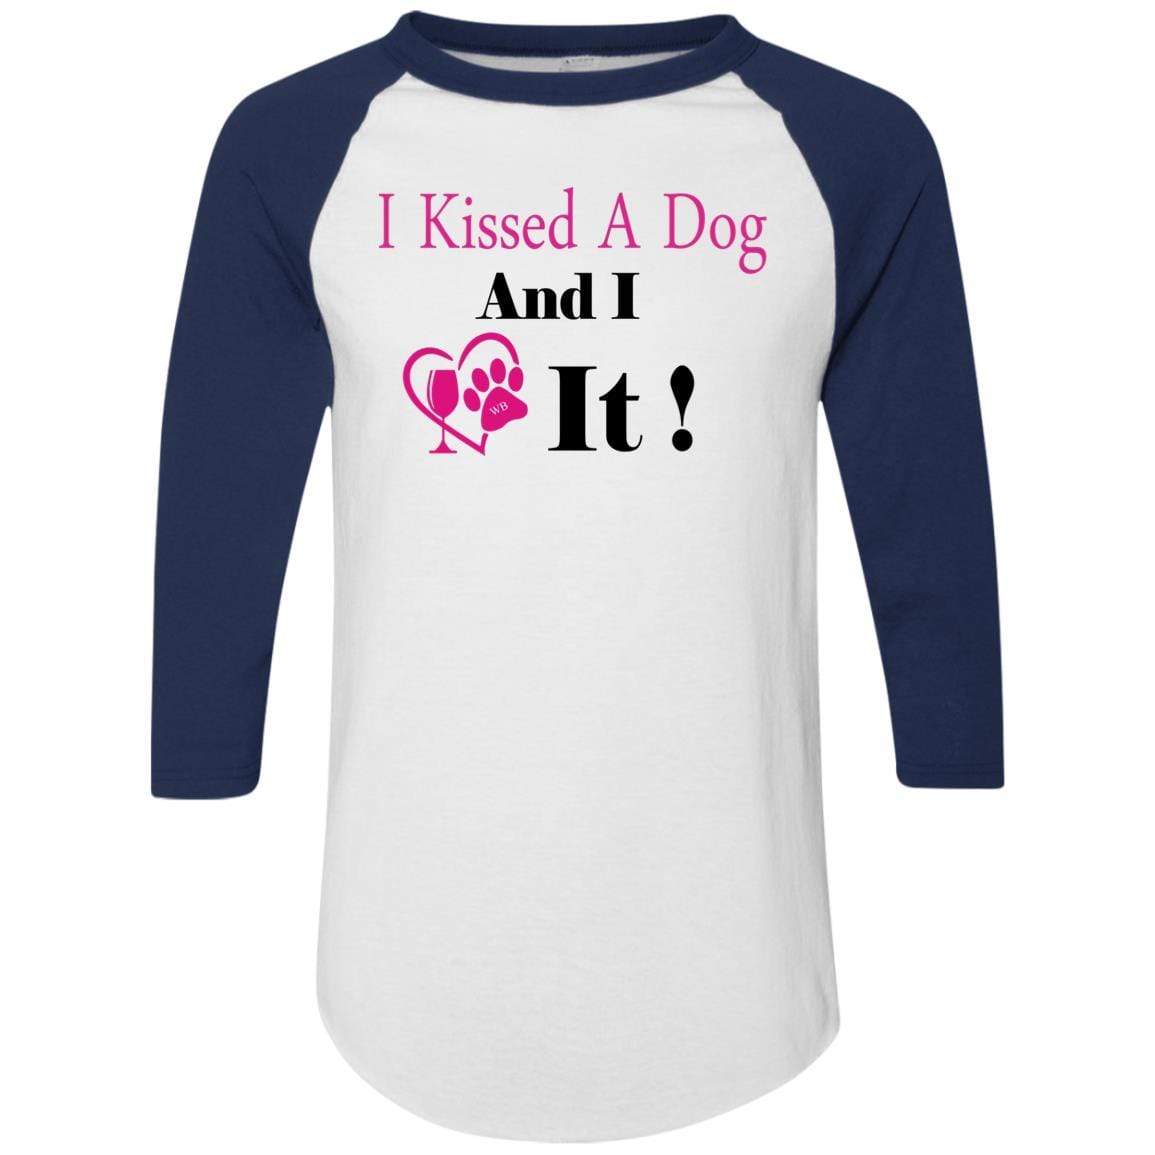 T-Shirts White/Navy / S WineyBitches.co "I Kissed A Dog And I Loved It:" Colorblock Raglan Jersey WineyBitchesCo